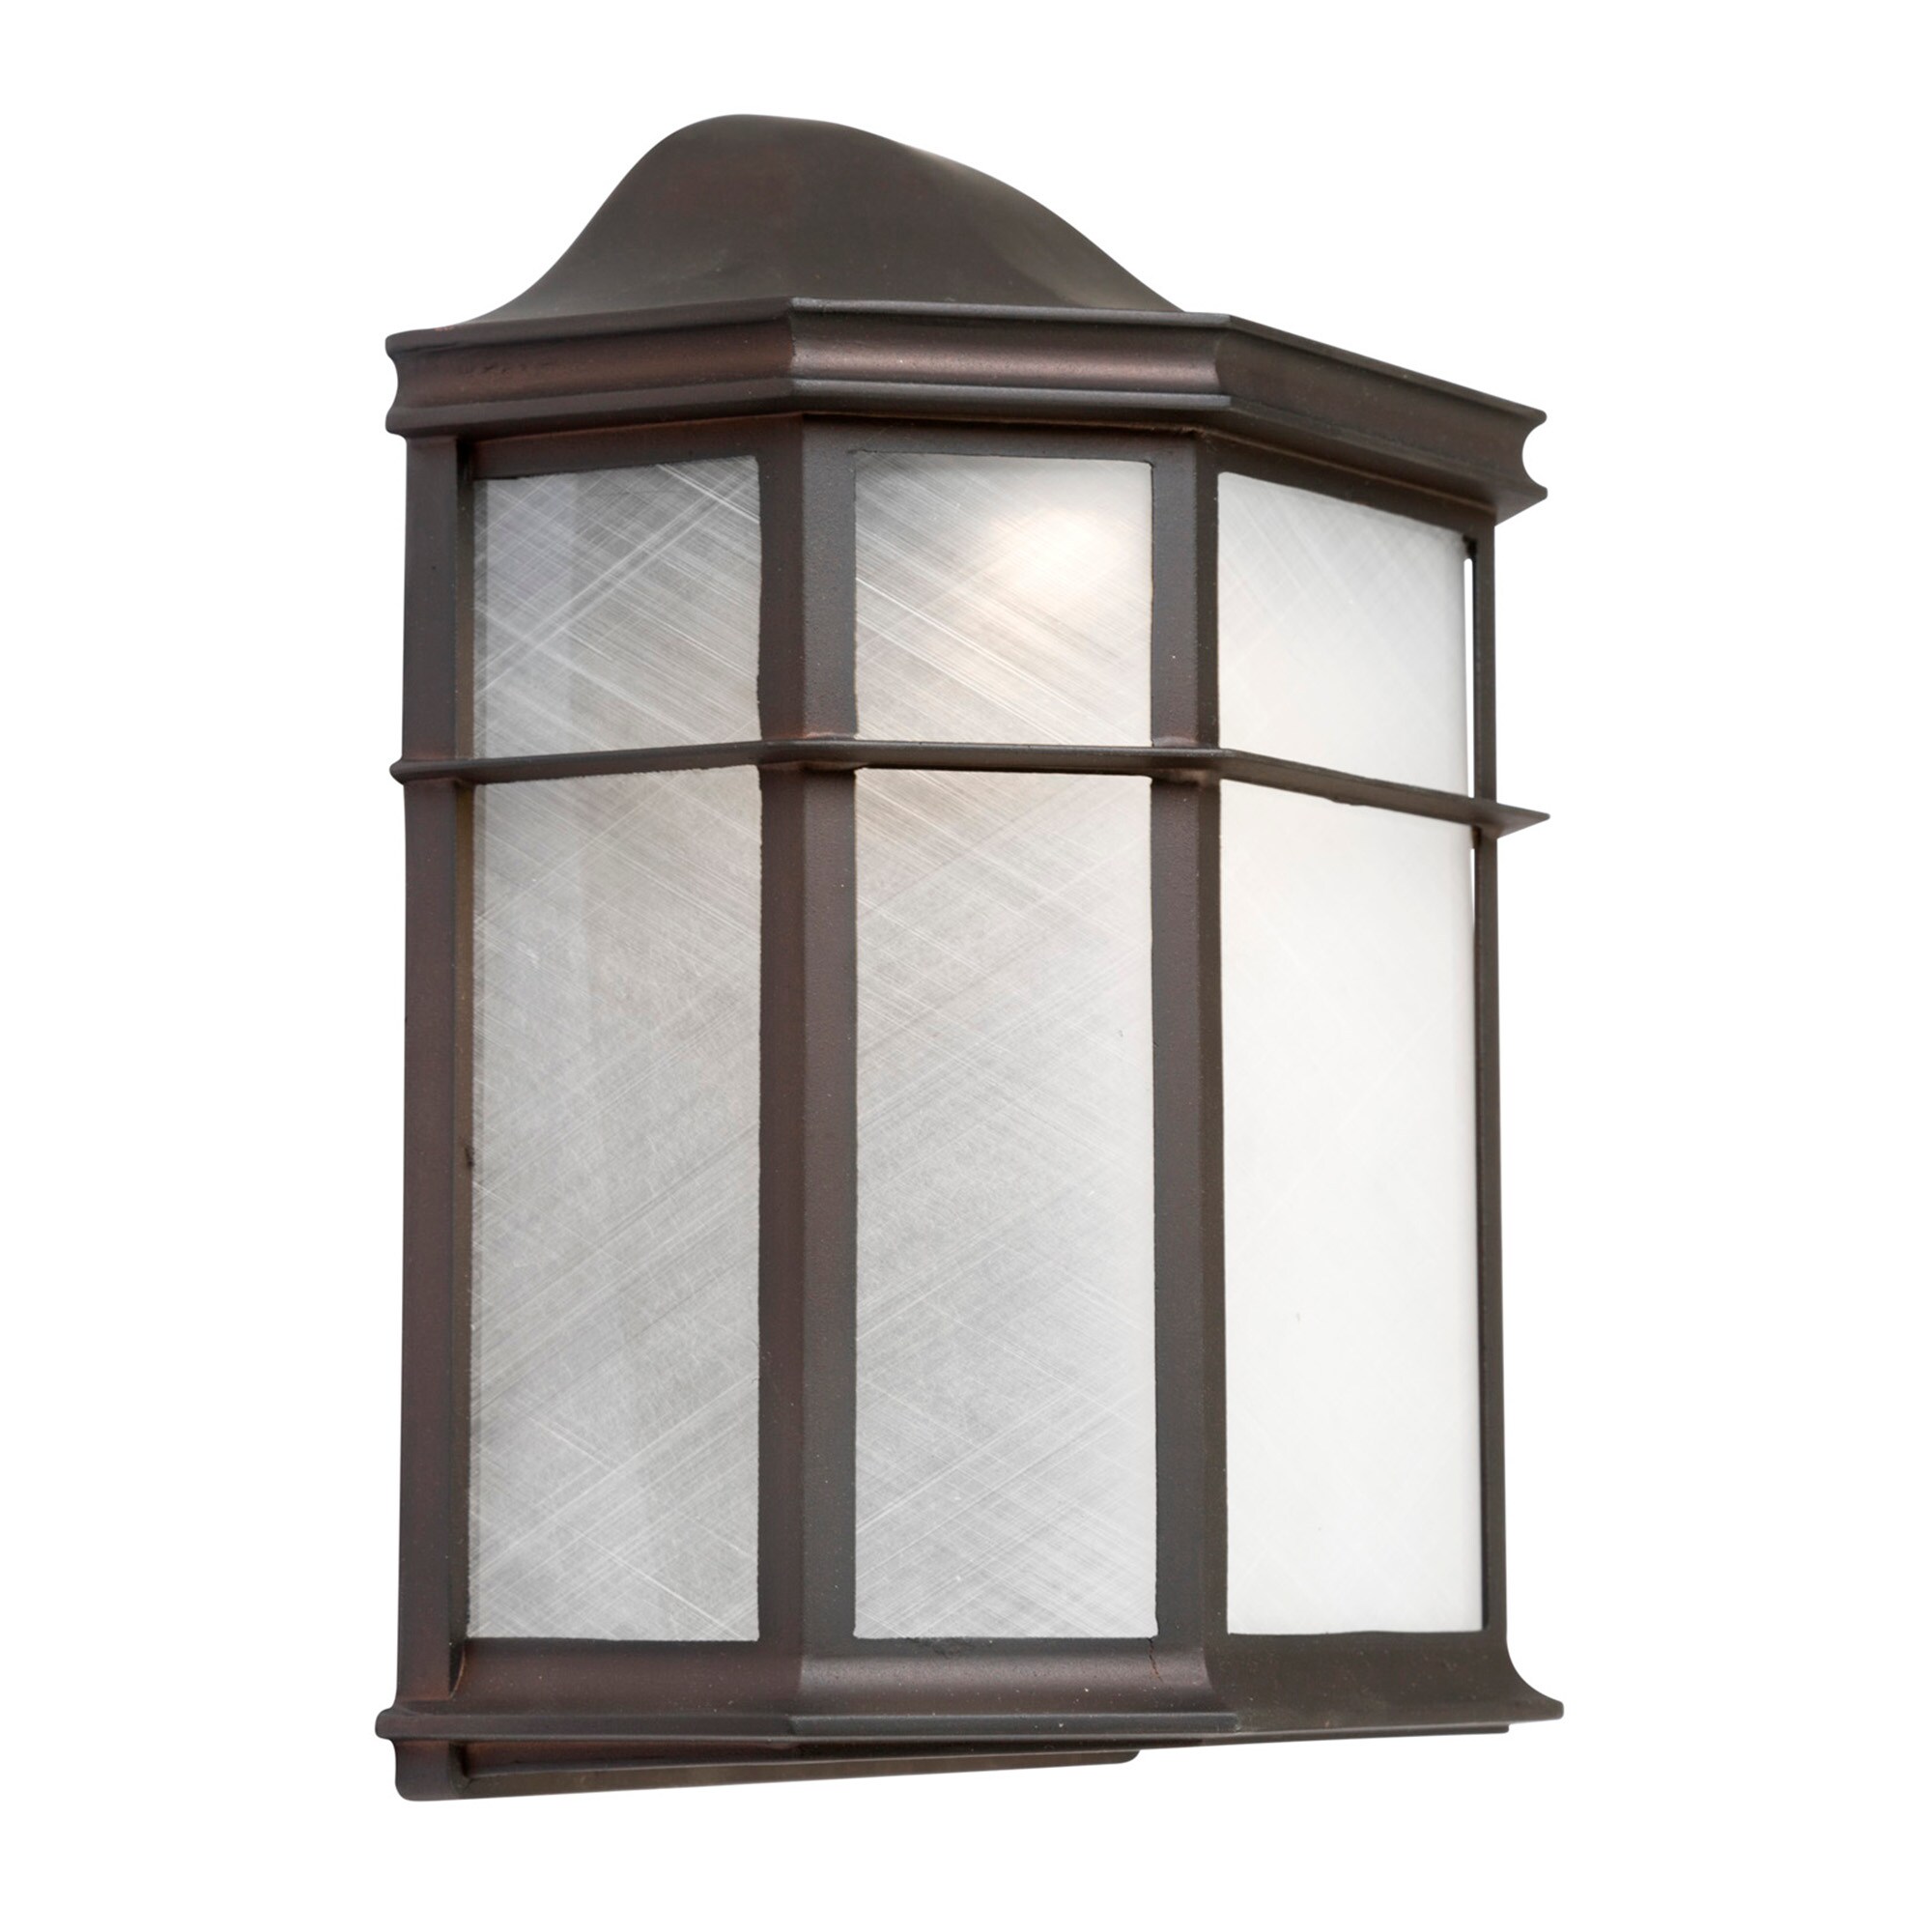 Forte Lighting Outdoor Wall Lighting at Lowes.com